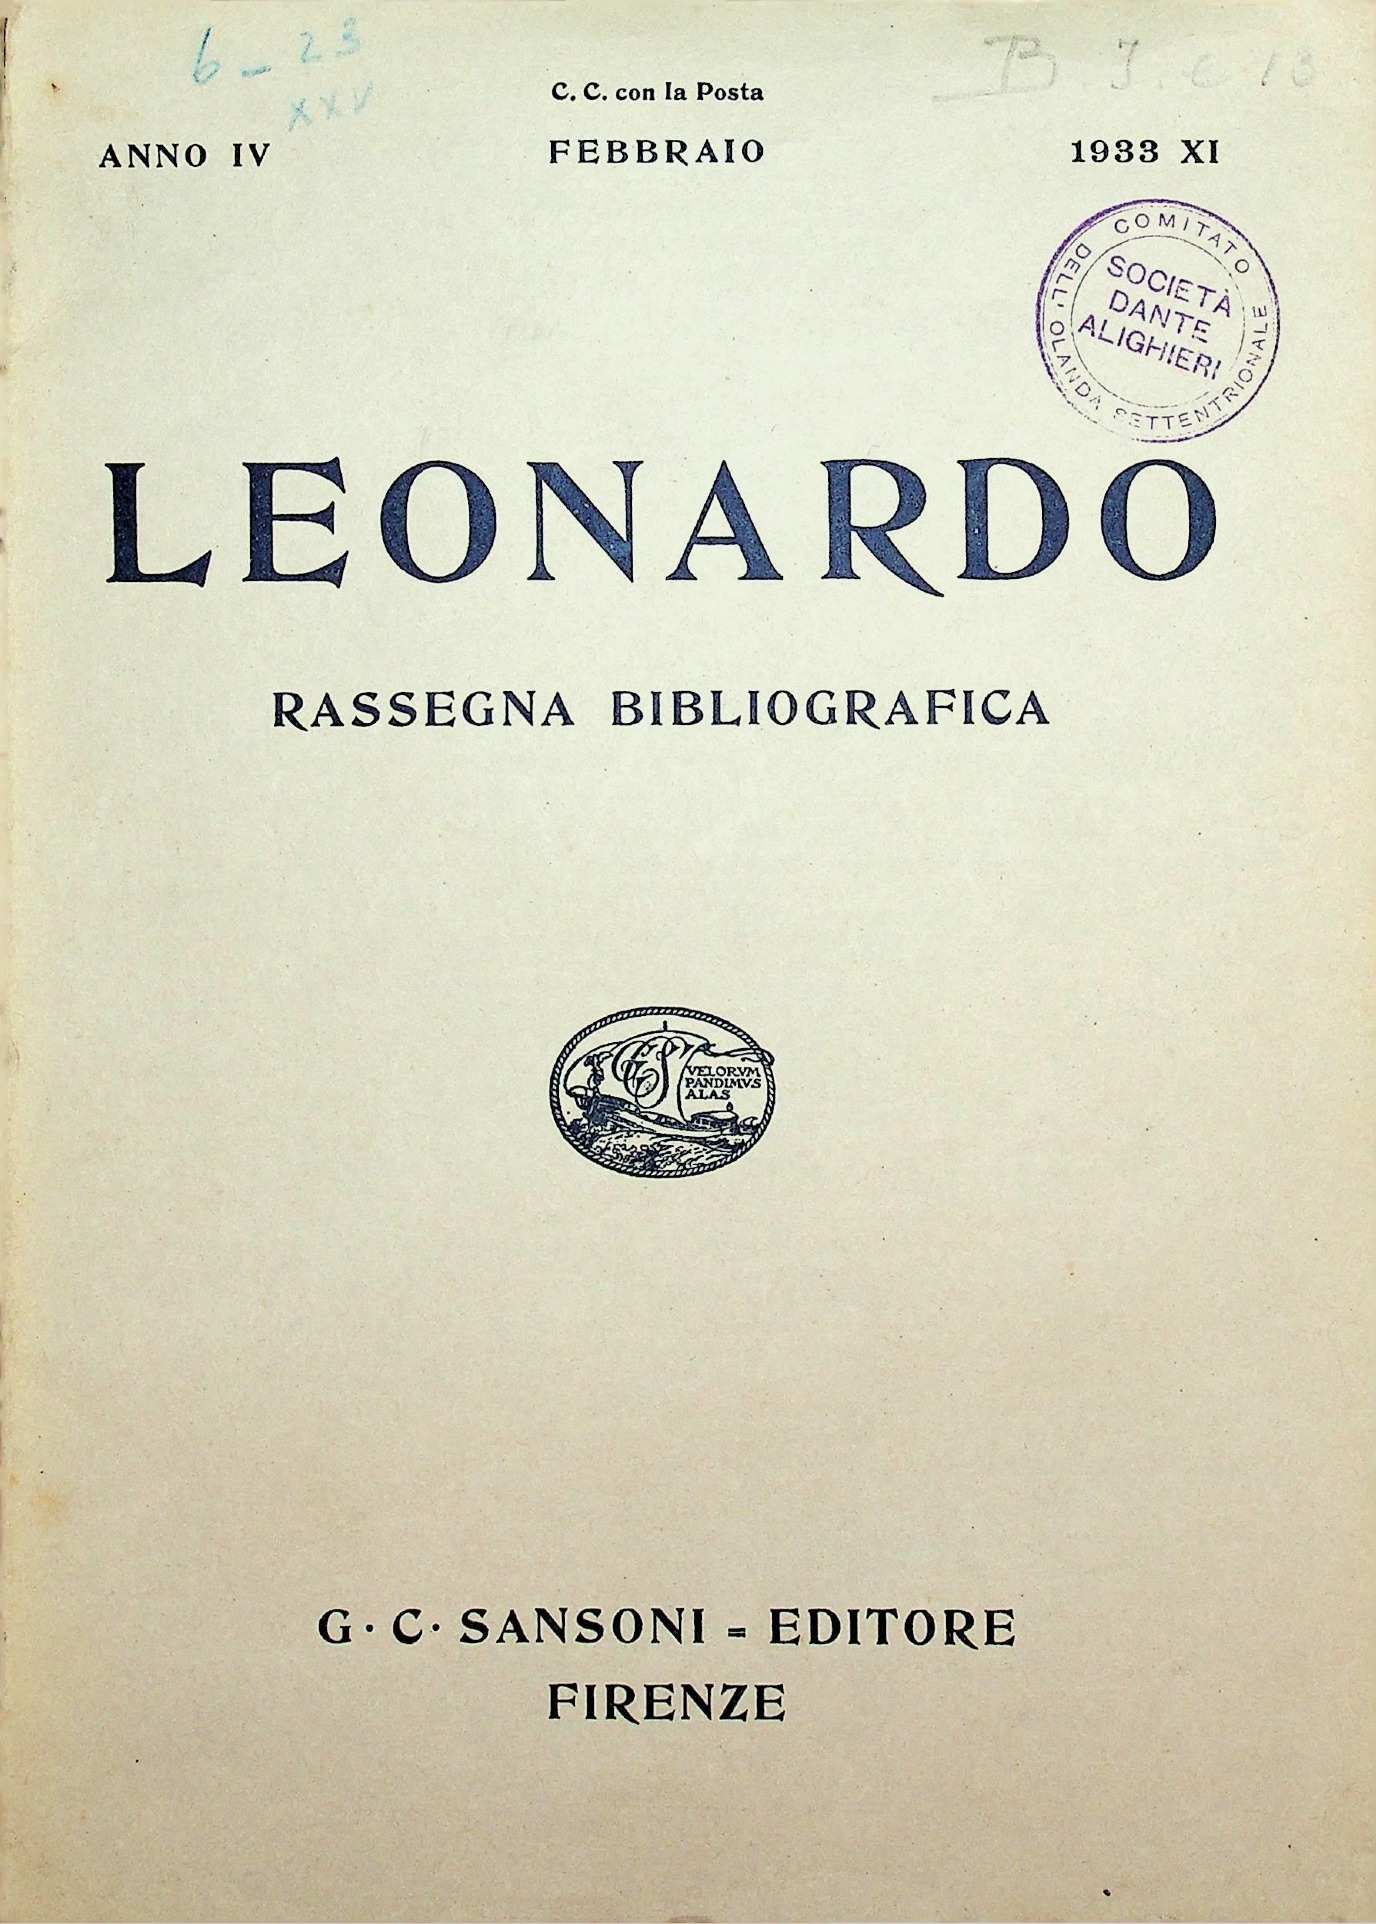 Front Covers of some of the periodicals and magazines held at the Bibliotheca Italiana with the stamp of La Dante.